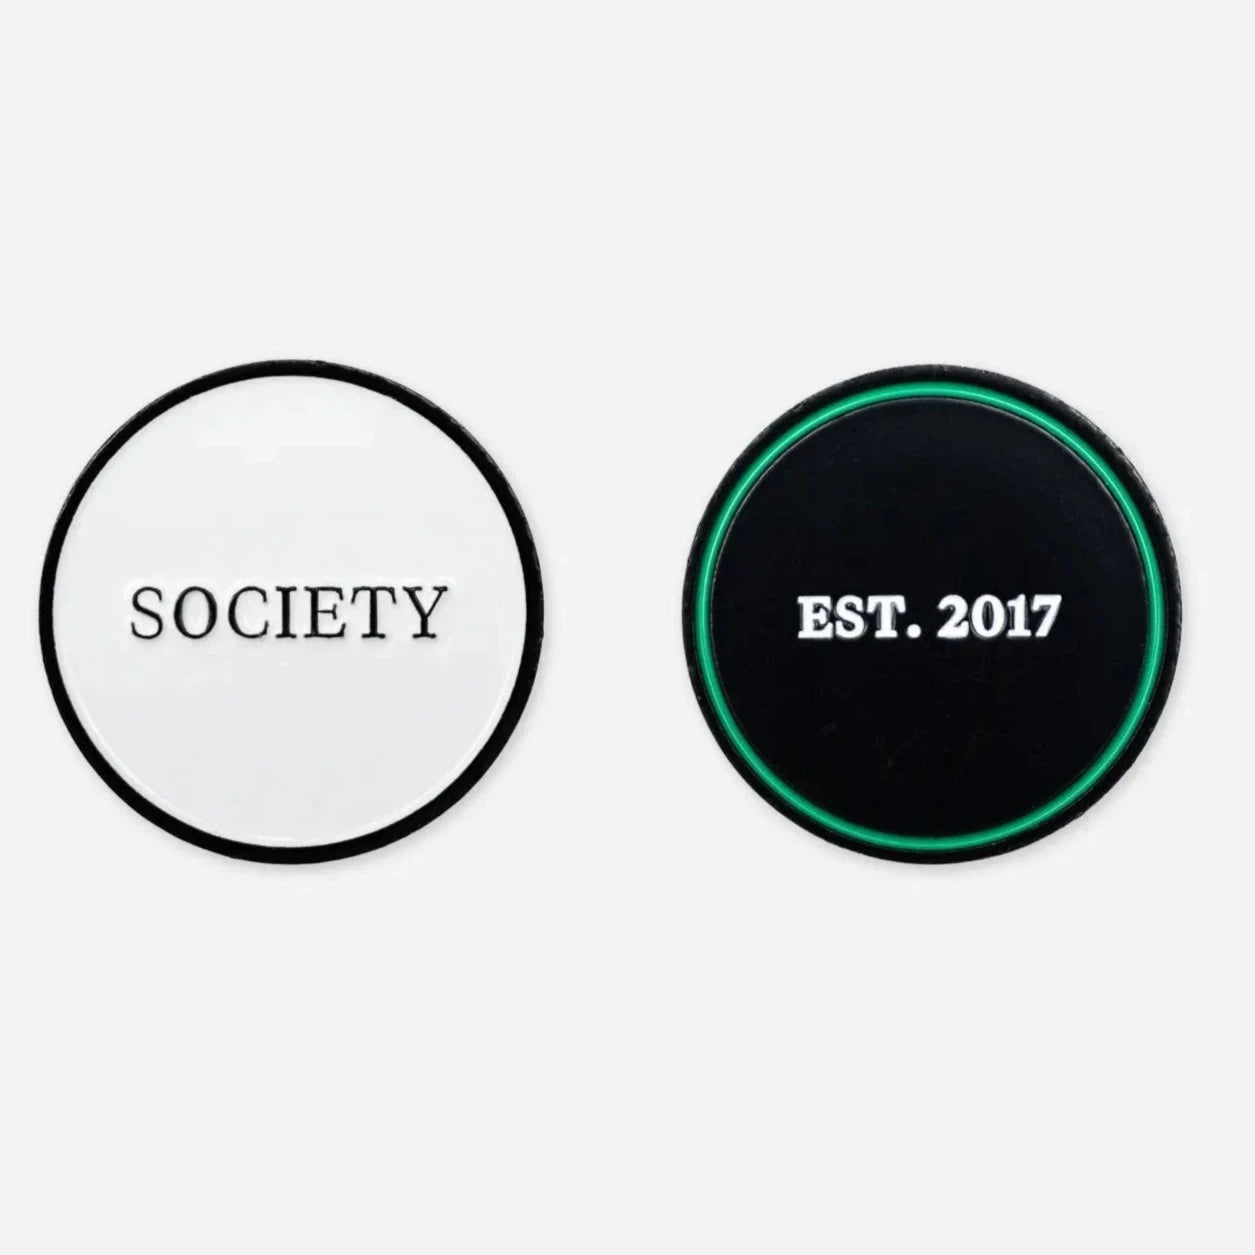 2 ball markers: 1 white with 'society' written on it in black, 1 black and green with 'est. 2017' written on it in white